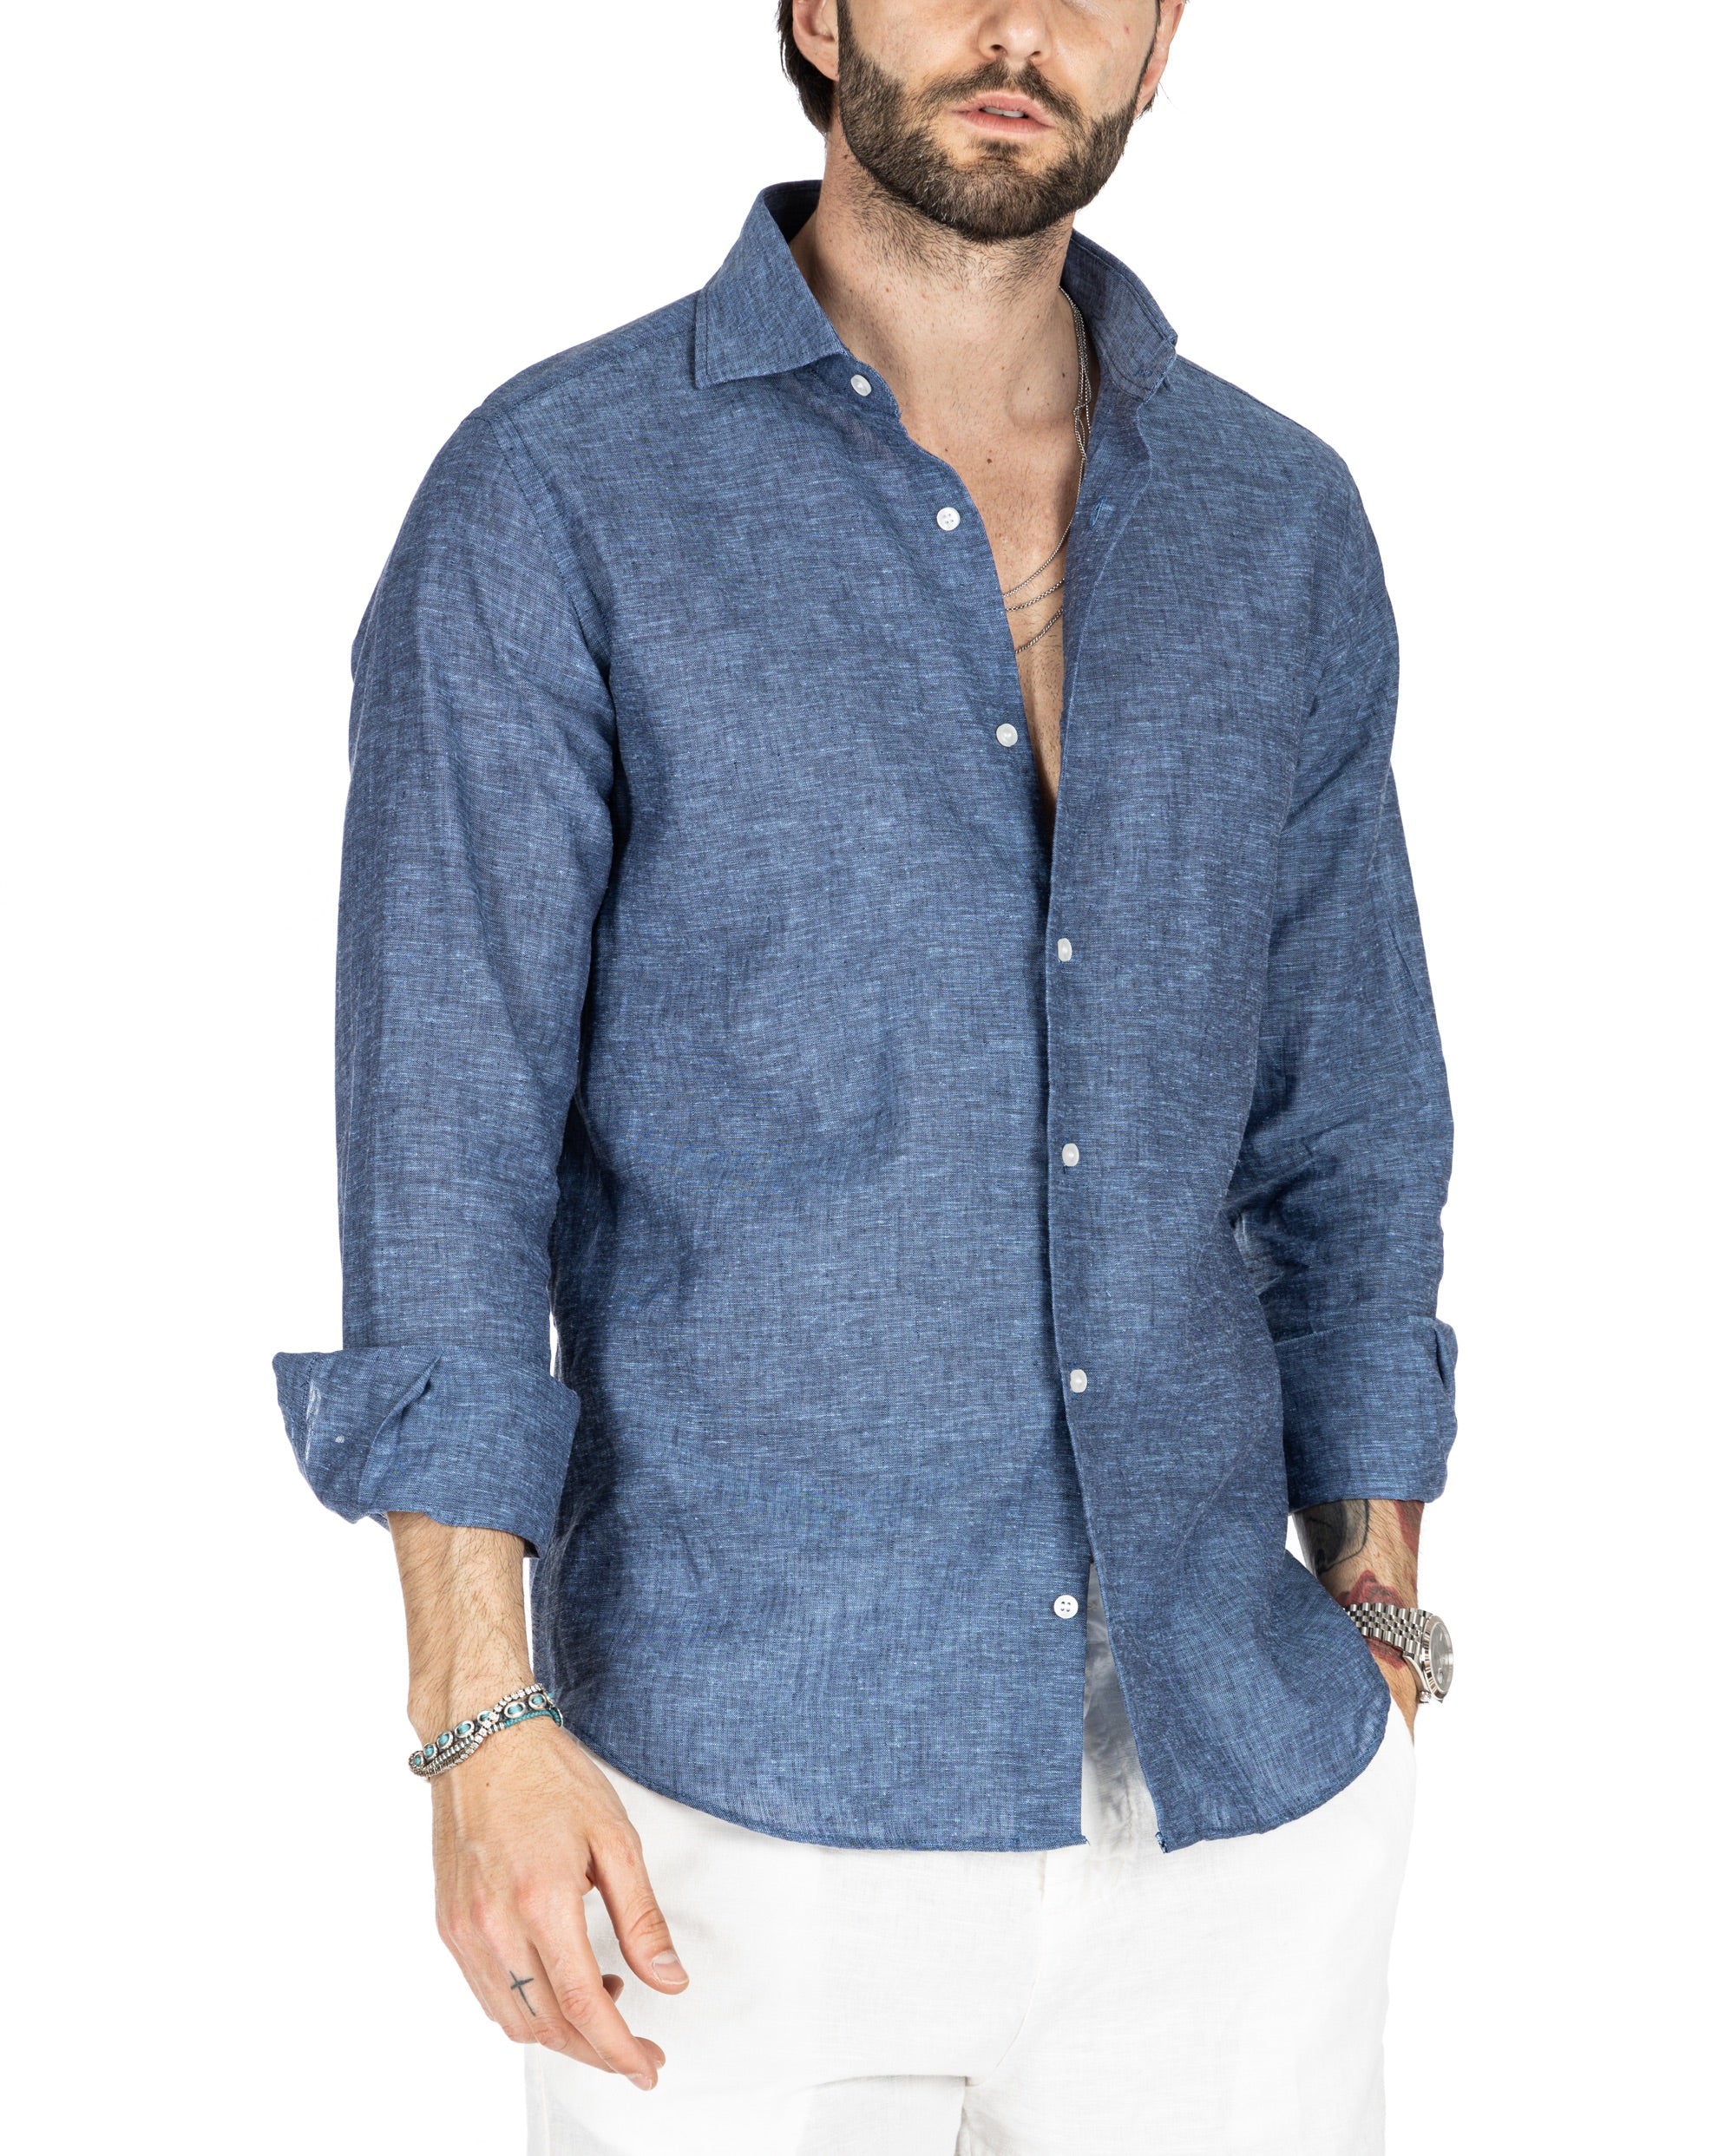 PRAIANO - CLASSIC JEANS SHIRT IN LINEN